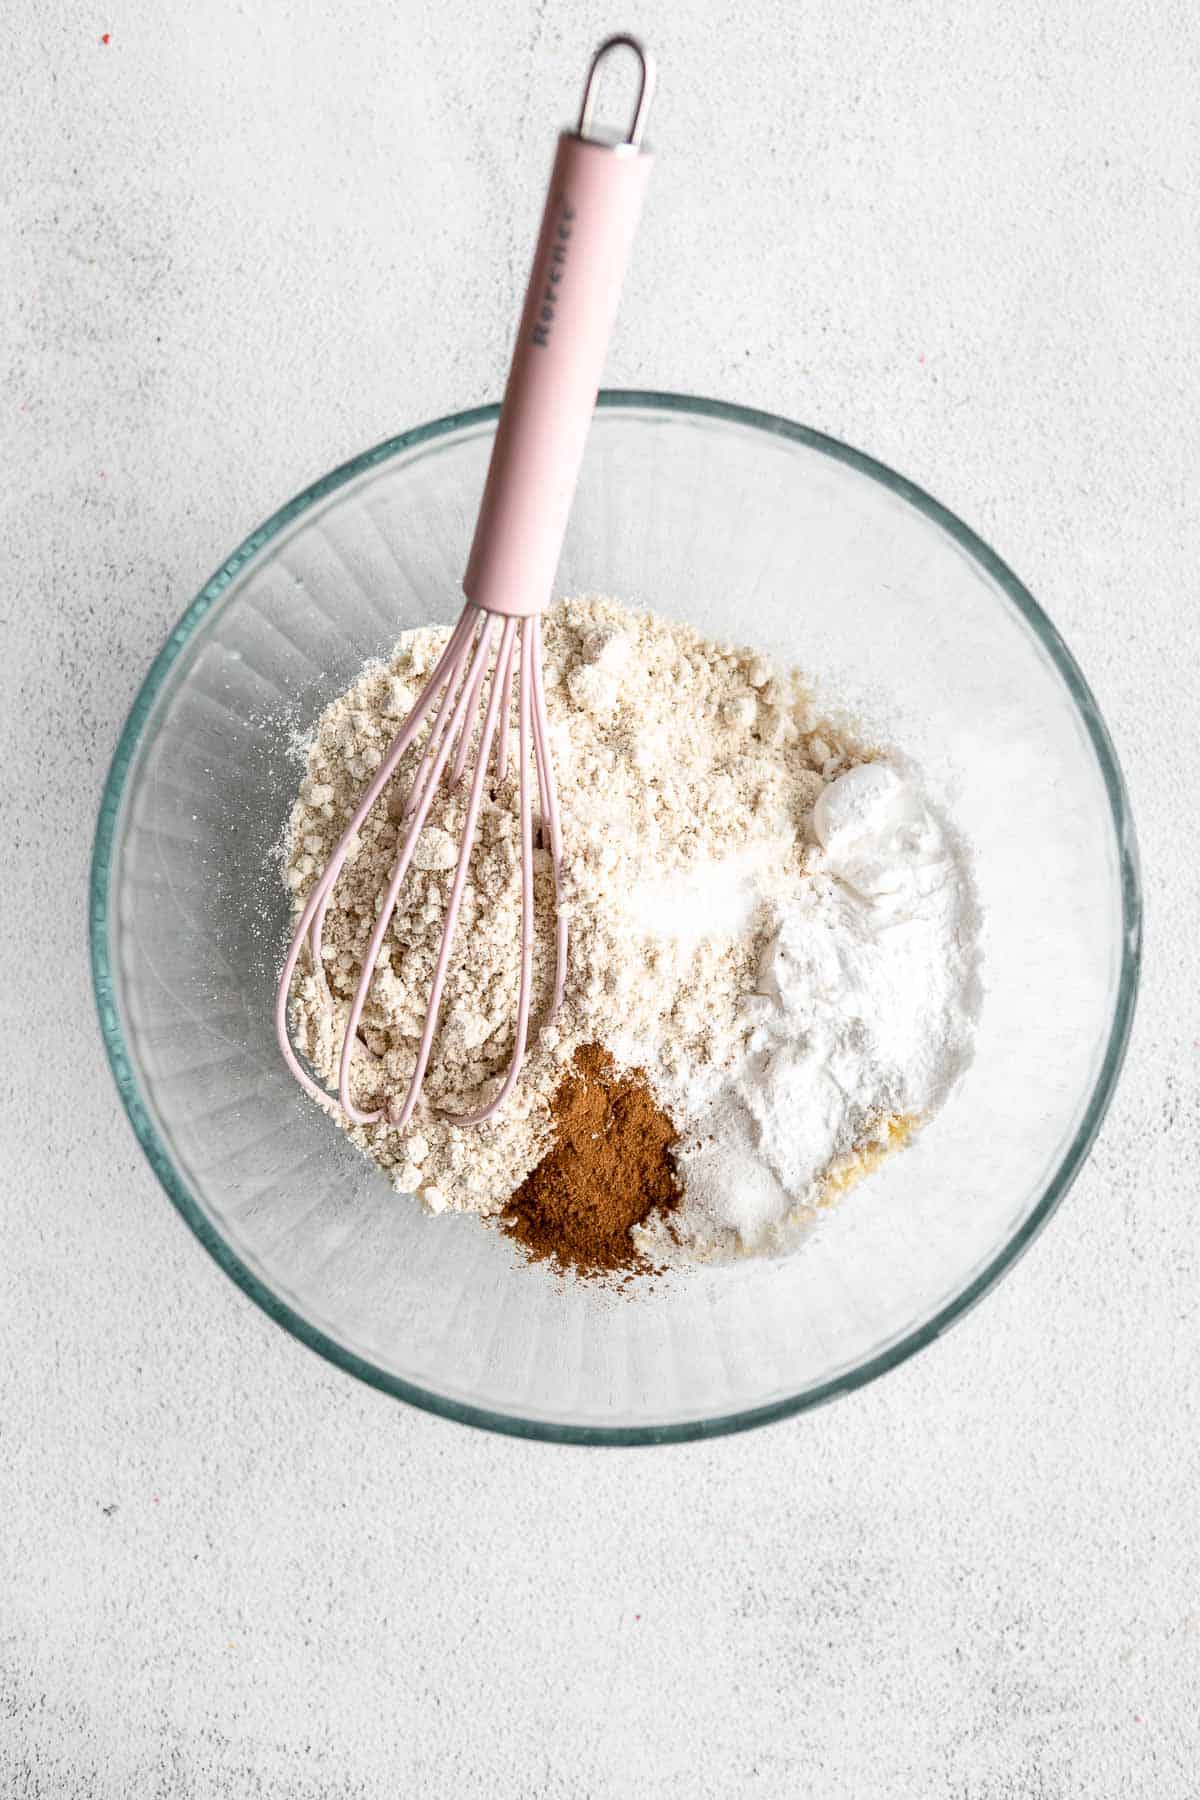 dry ingredients in a glass bowl with a whisk